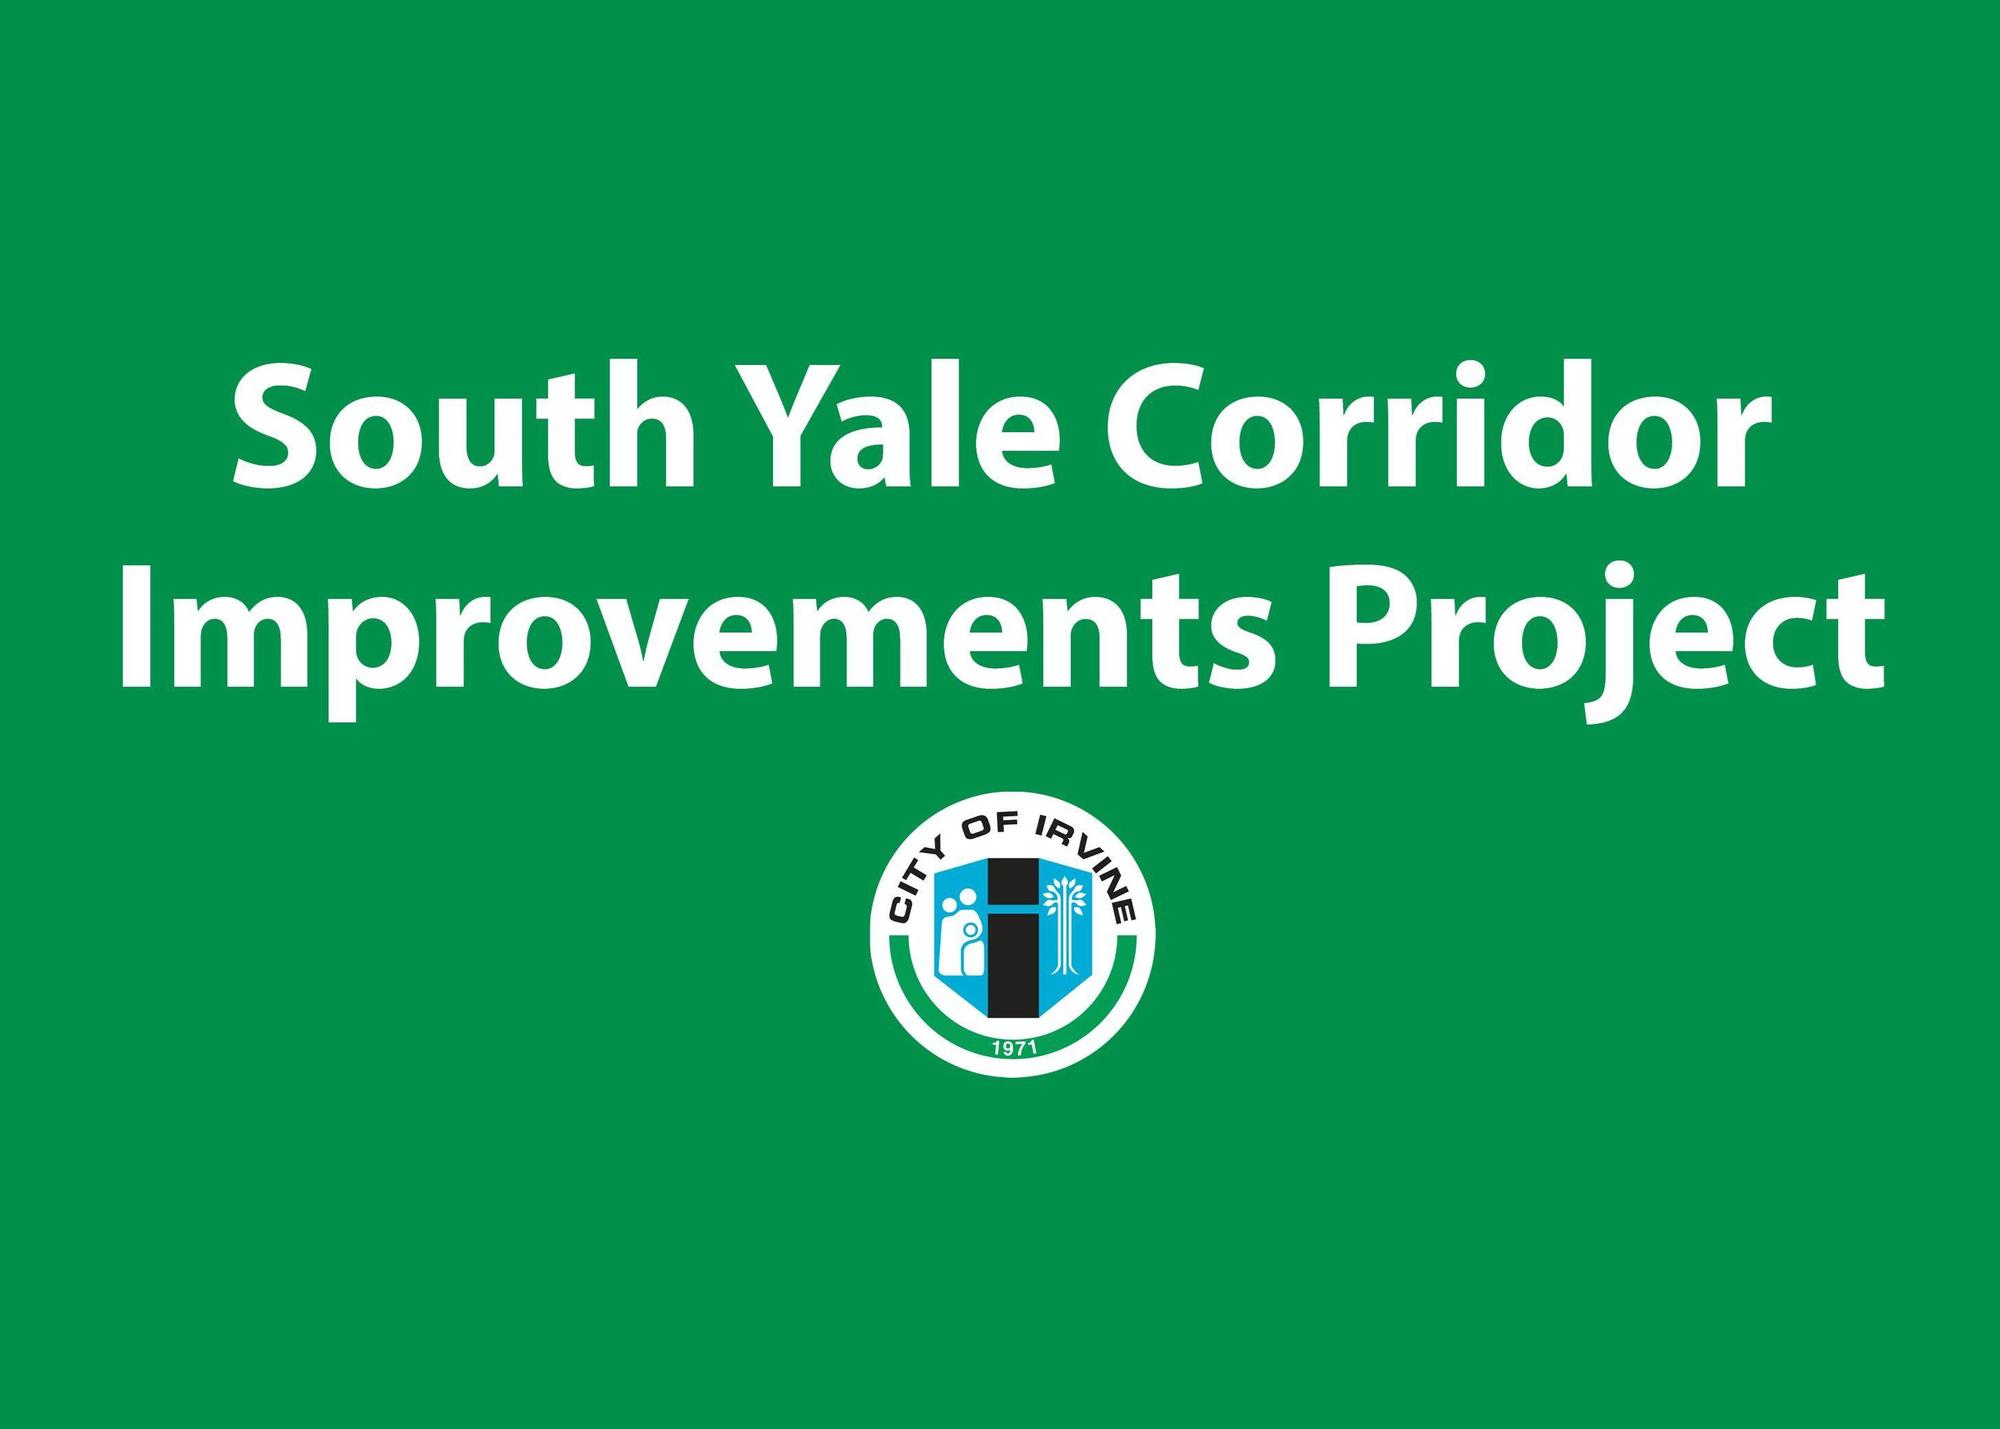 South Yale Corridor Improvements Project